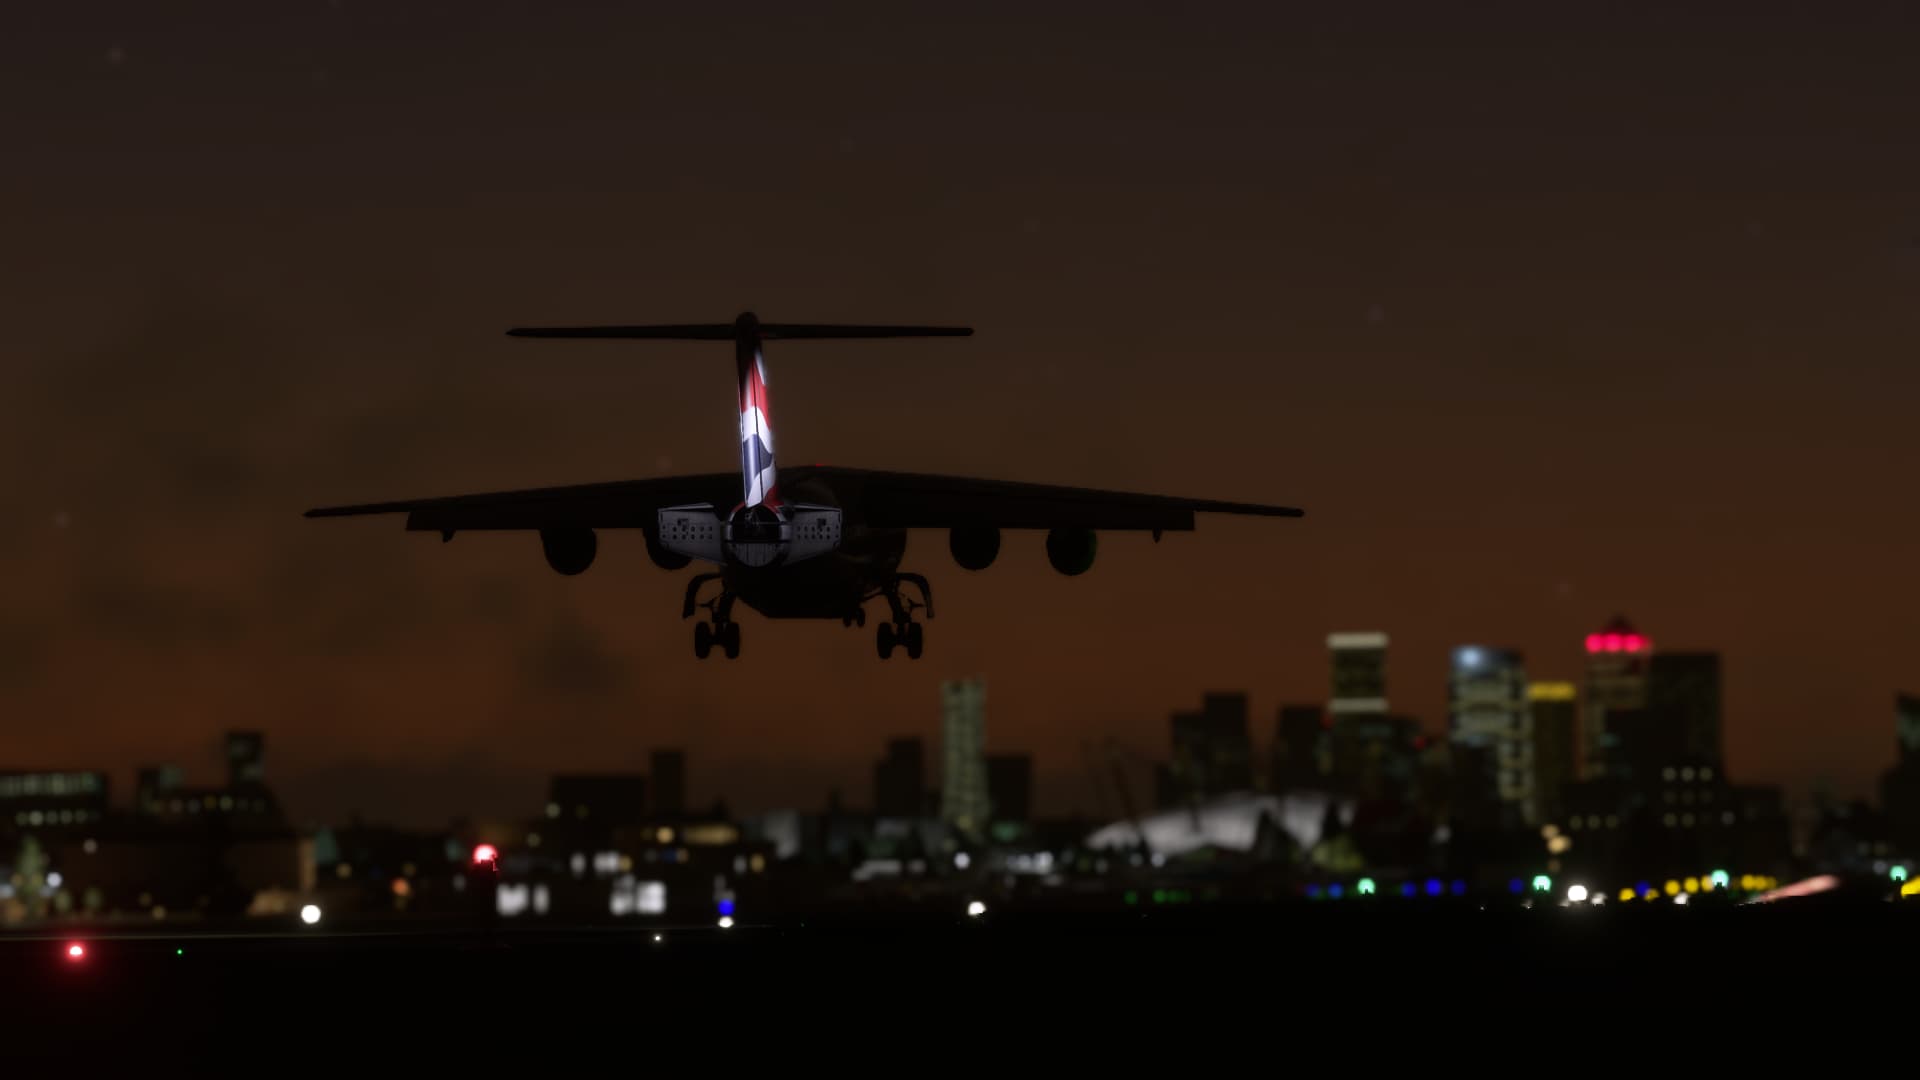 A British Airways BAE 146 airliner has tail spoilers extended on approach for runway 27 at London City Airport.